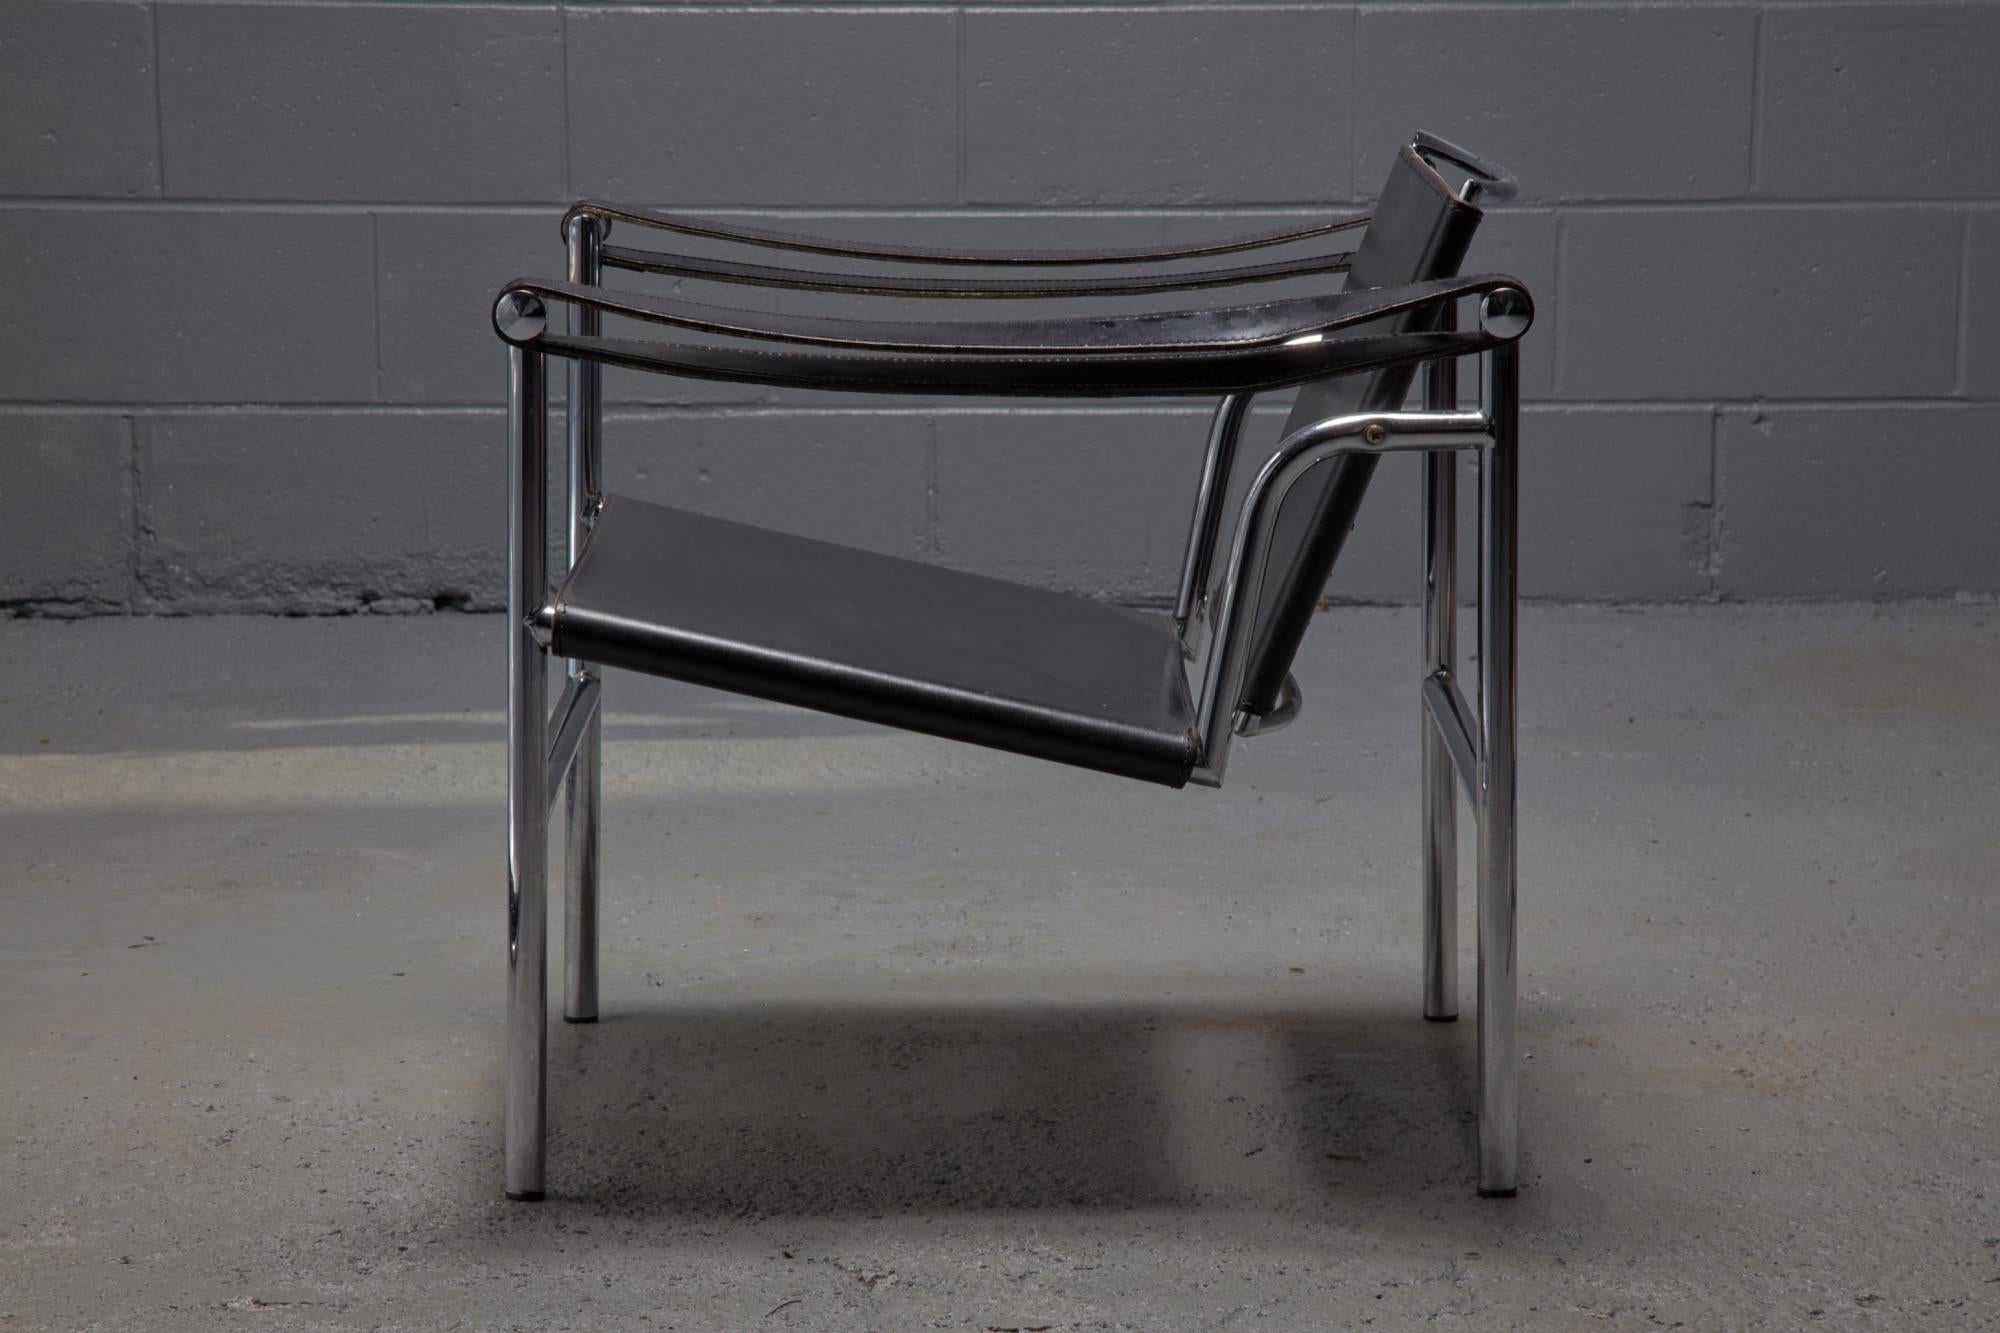 Designed in 1928 for Cassina, Le Corbusier, Pierre Jeanneret and Charlotte Perriand the sleek LC1 Chair is constructed with a polished, chrome-plated steel frame and black leather seat and back. A key feature of the chair is its adjustable back,